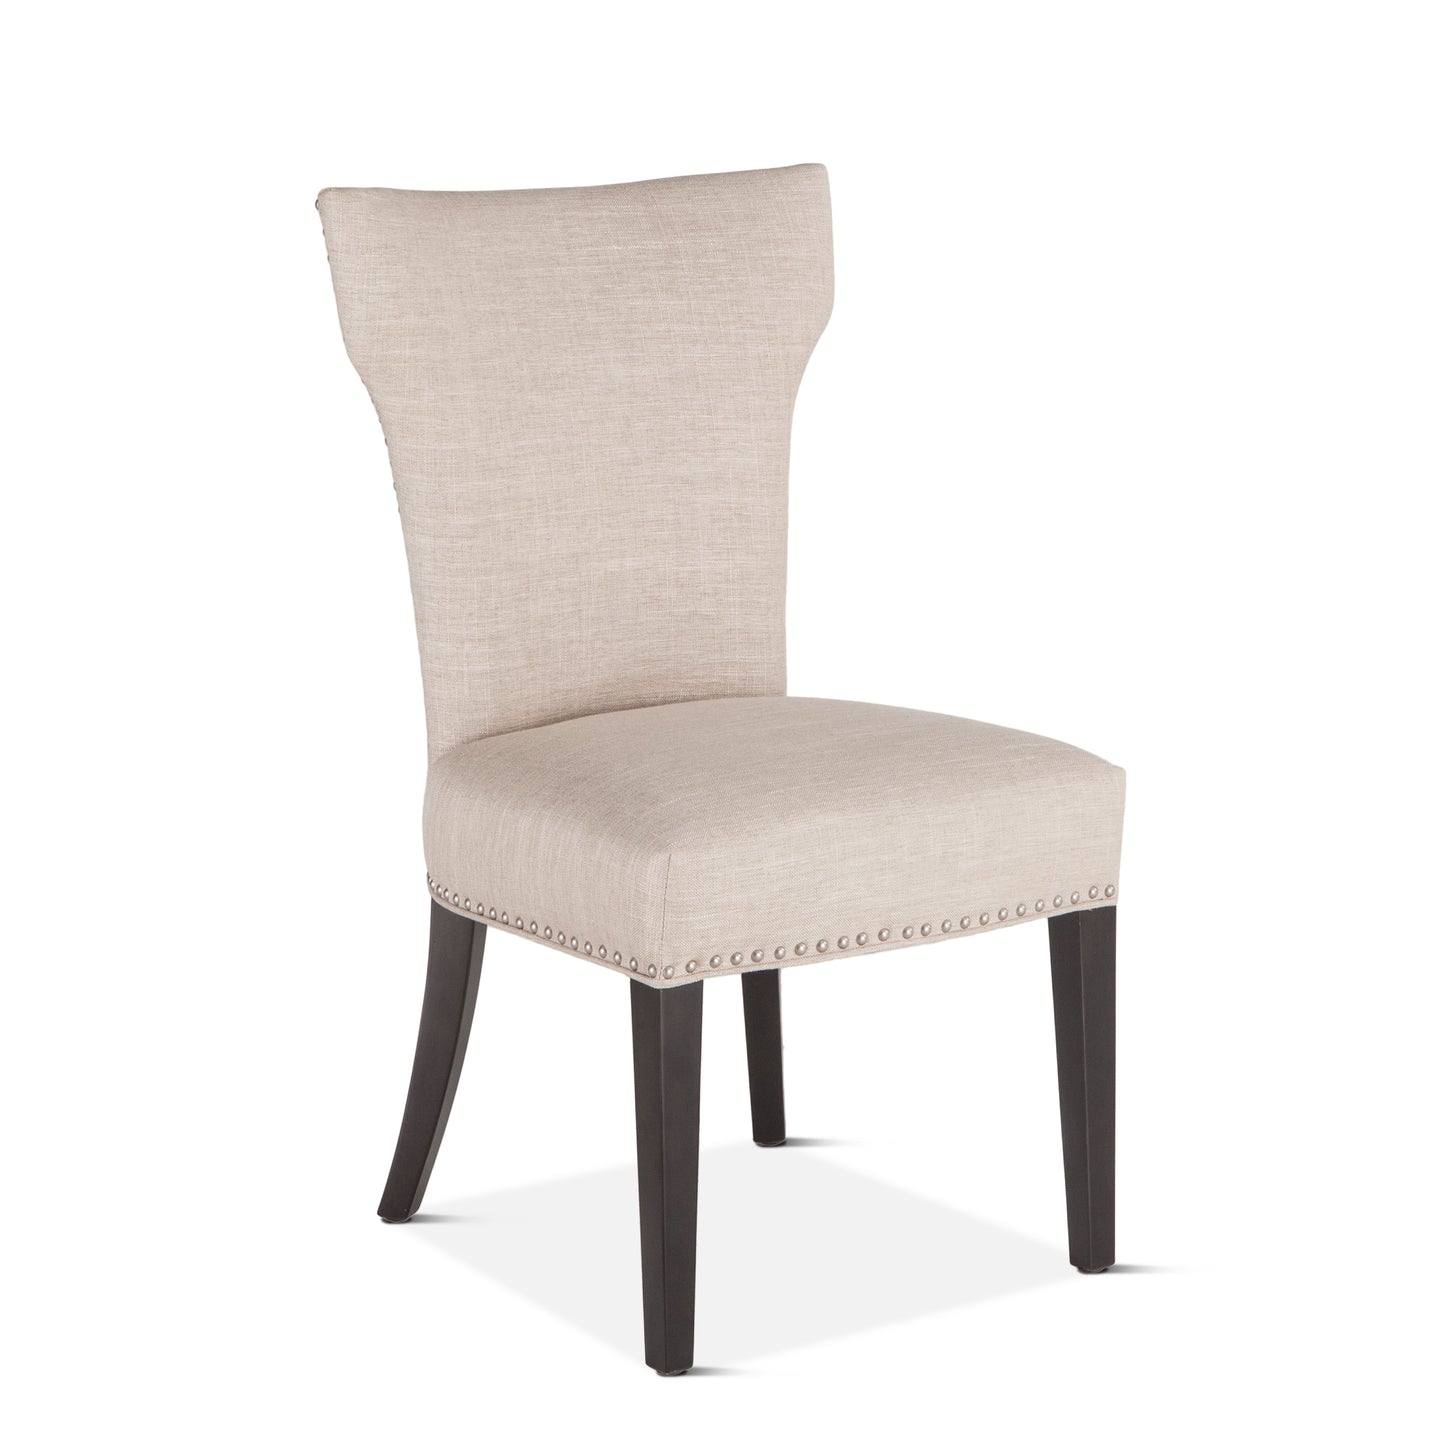 Rebecca Beige Dining Chair with Java Leg